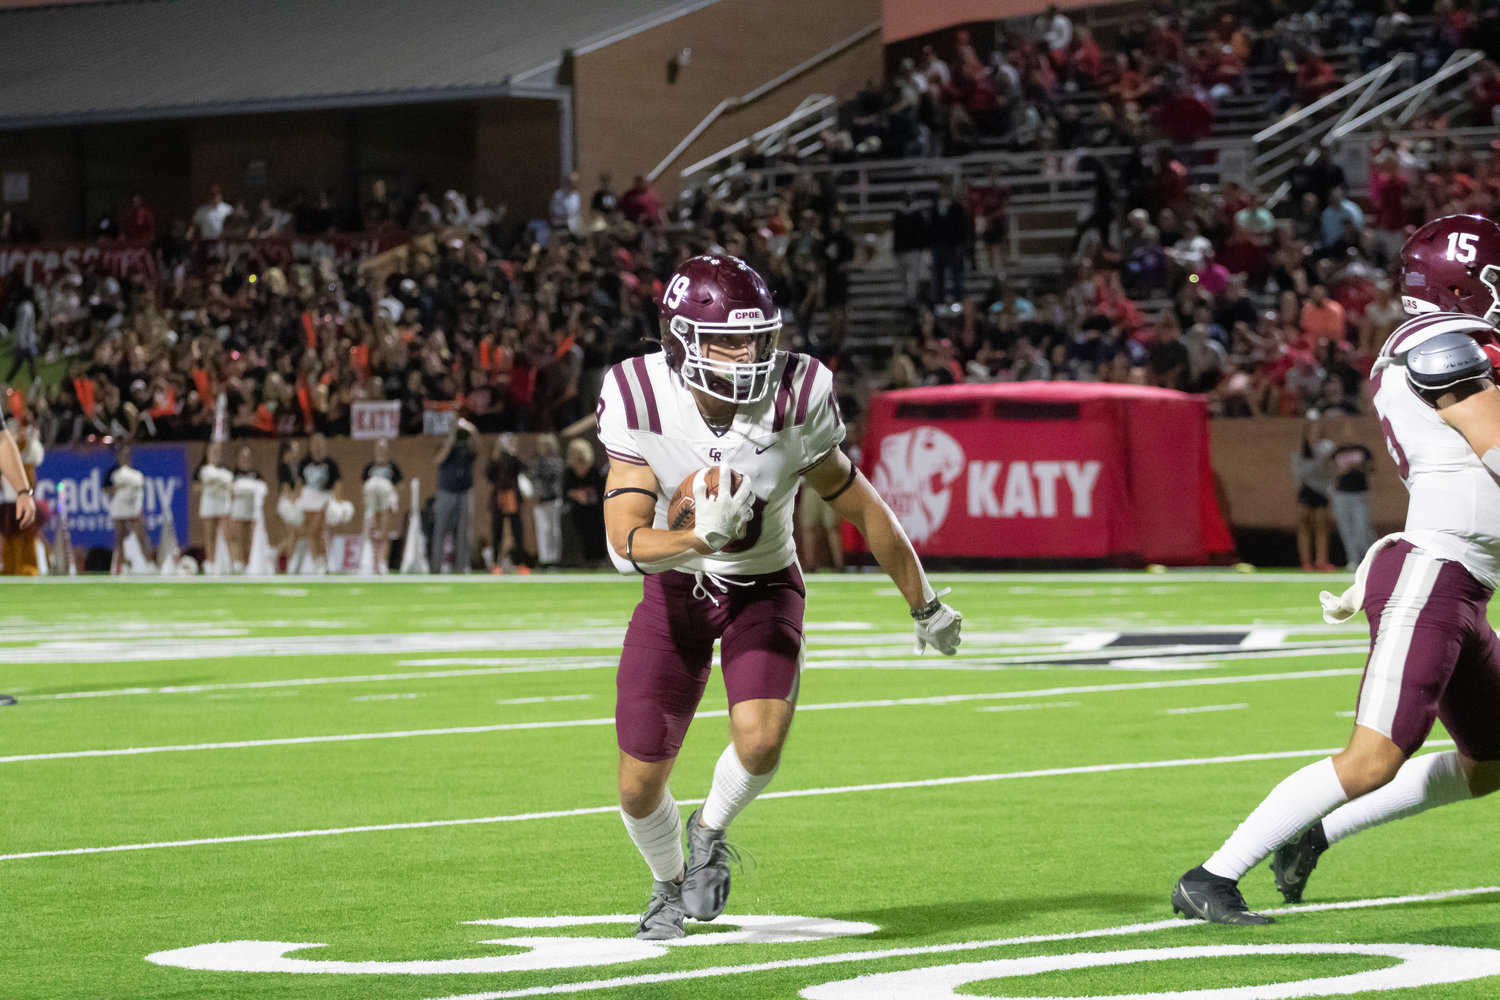 Cinco Ranch's Noah Abboud tries to run upfield during Friday's game between Katy and Cinco Ranch at Rhodes Stadium.